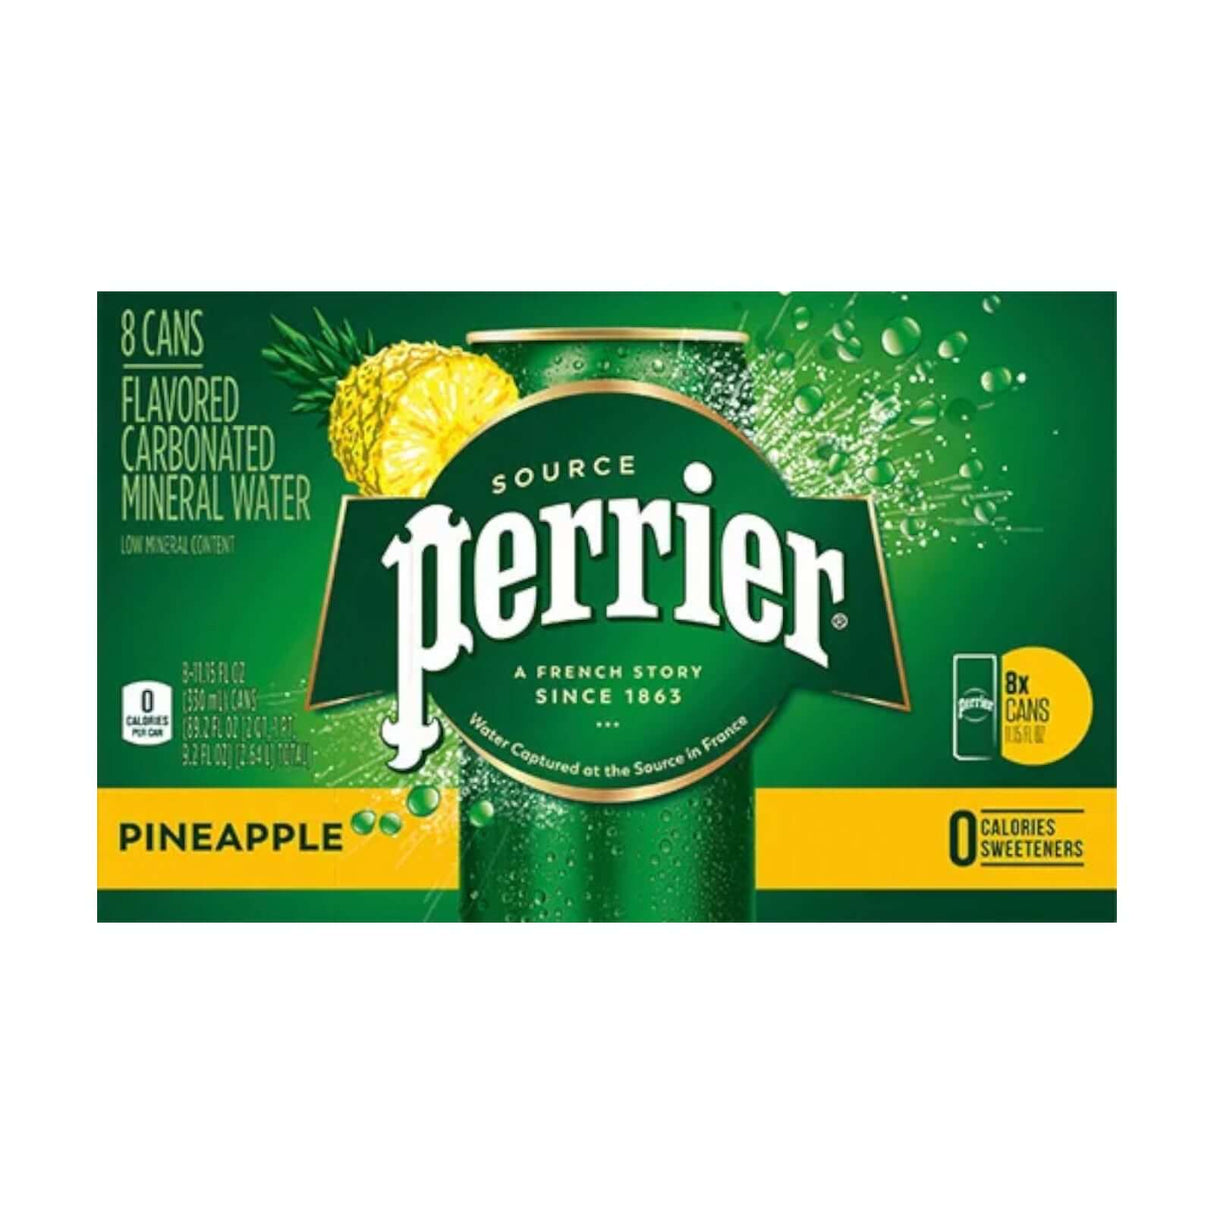 Perrier Pineapple Flavored Carbonated Mineral Water